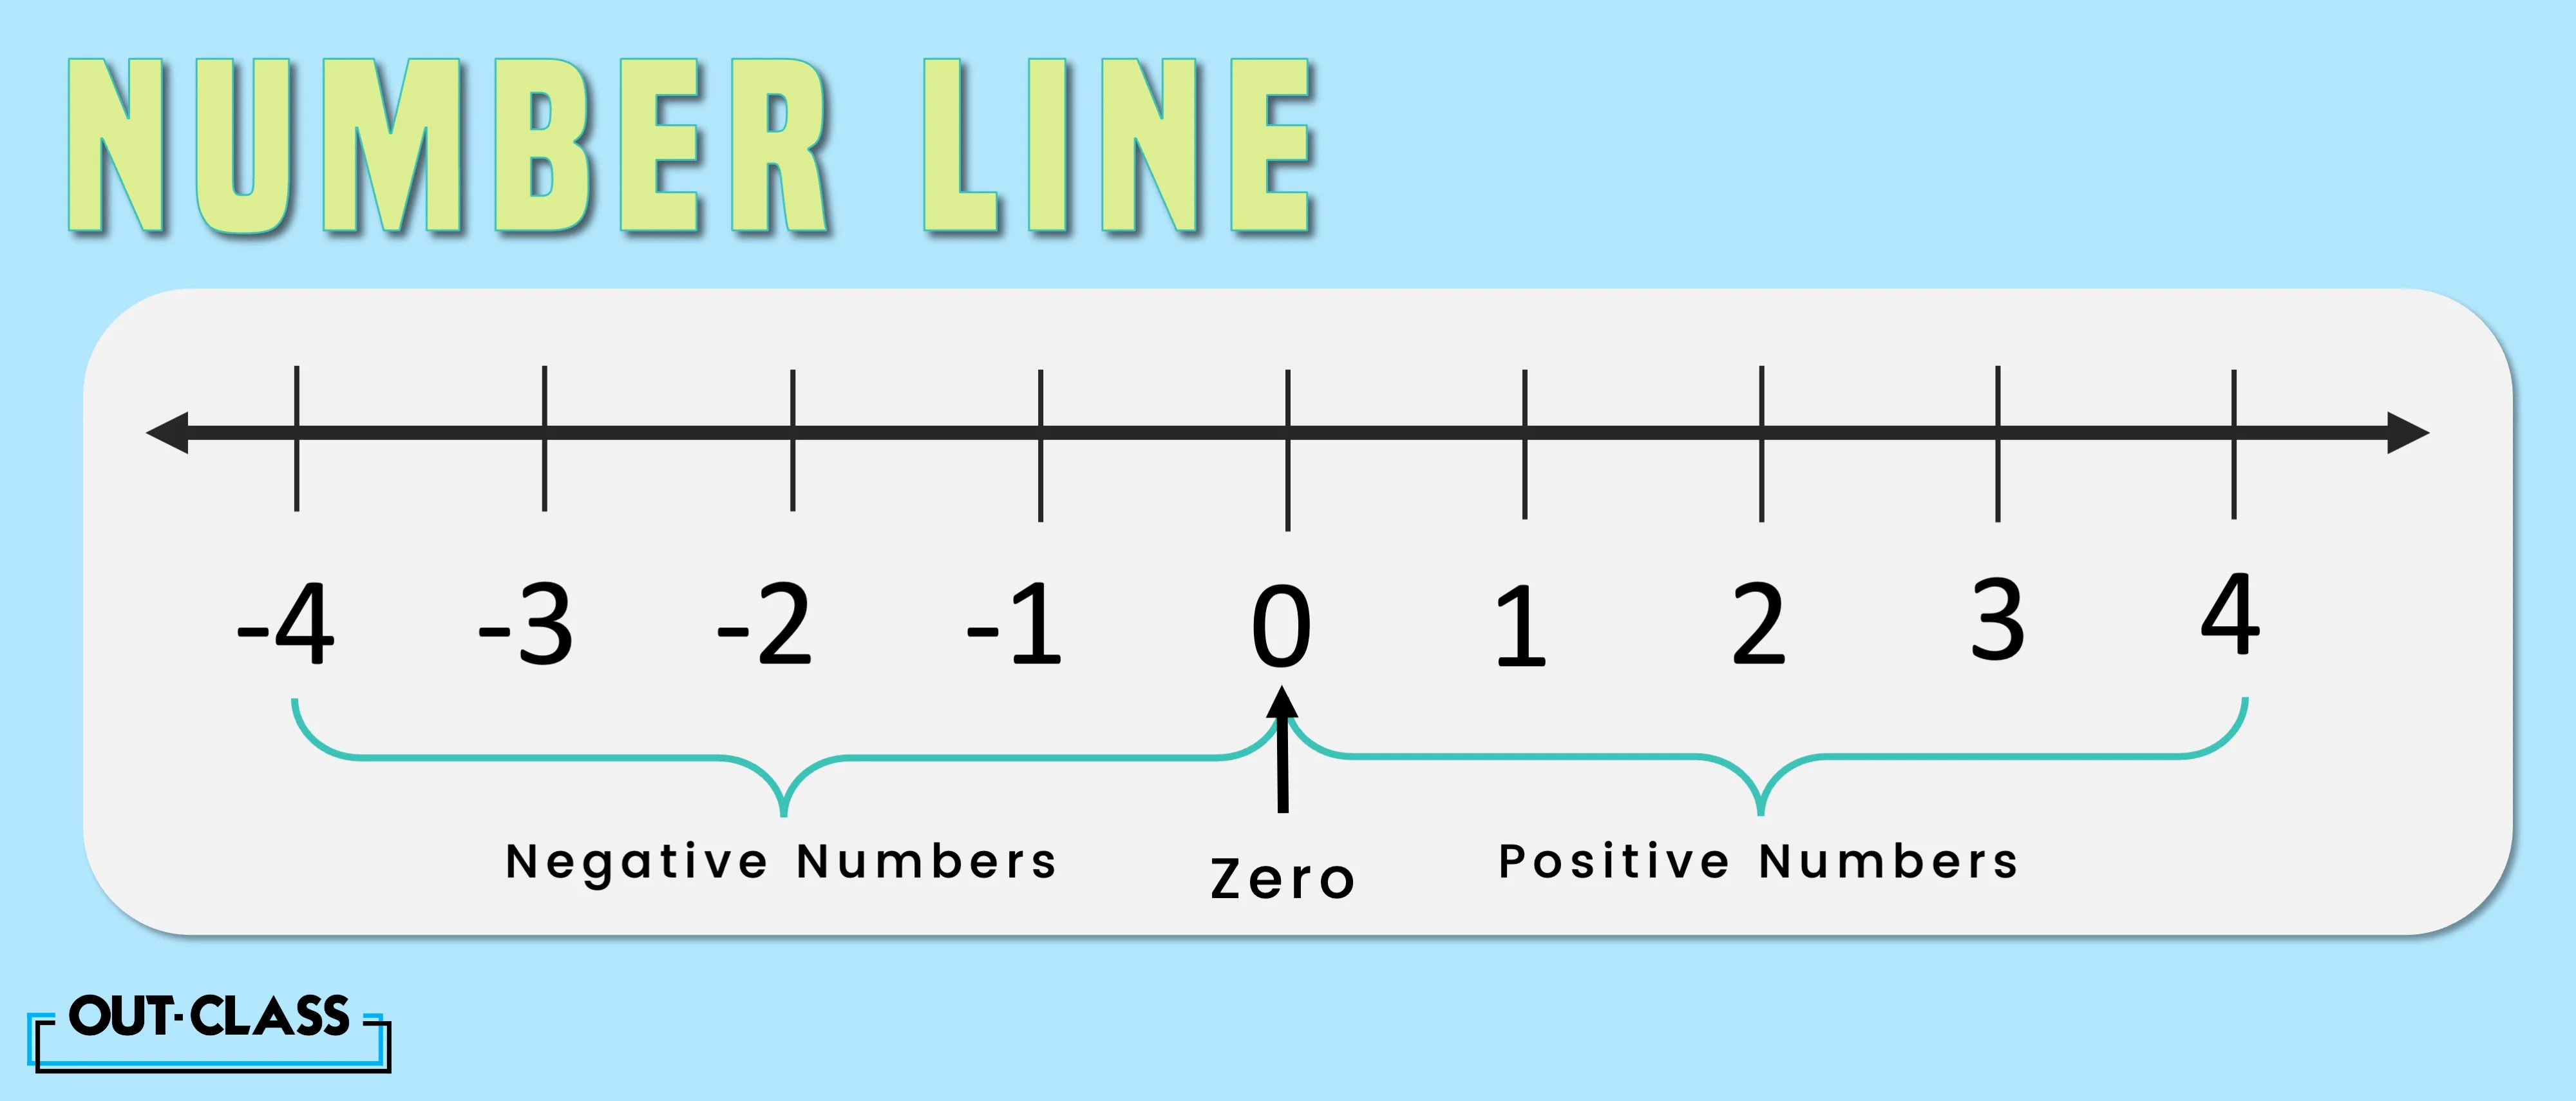 A number line can be described as a visual representation of numbers on a straight line. Each number is placed at an equal distance from each other, usually on a horizontal line, with numbers moving from left to right (numbers to the left representing negative numbers on the number line and numbers to the right representing positive numbers on the number line).